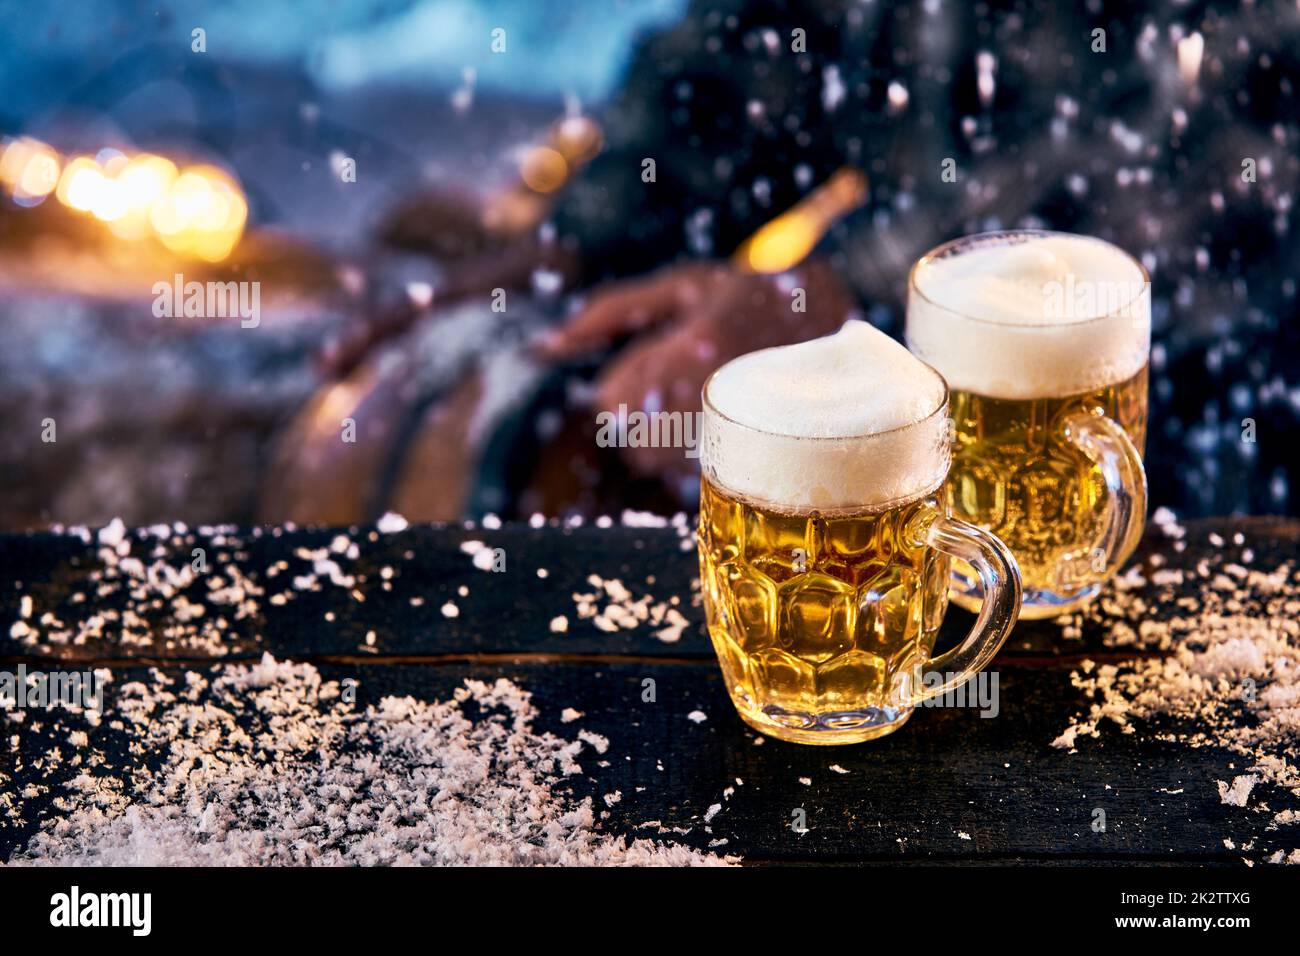 Glasses of beer on table in winter Stock Photo